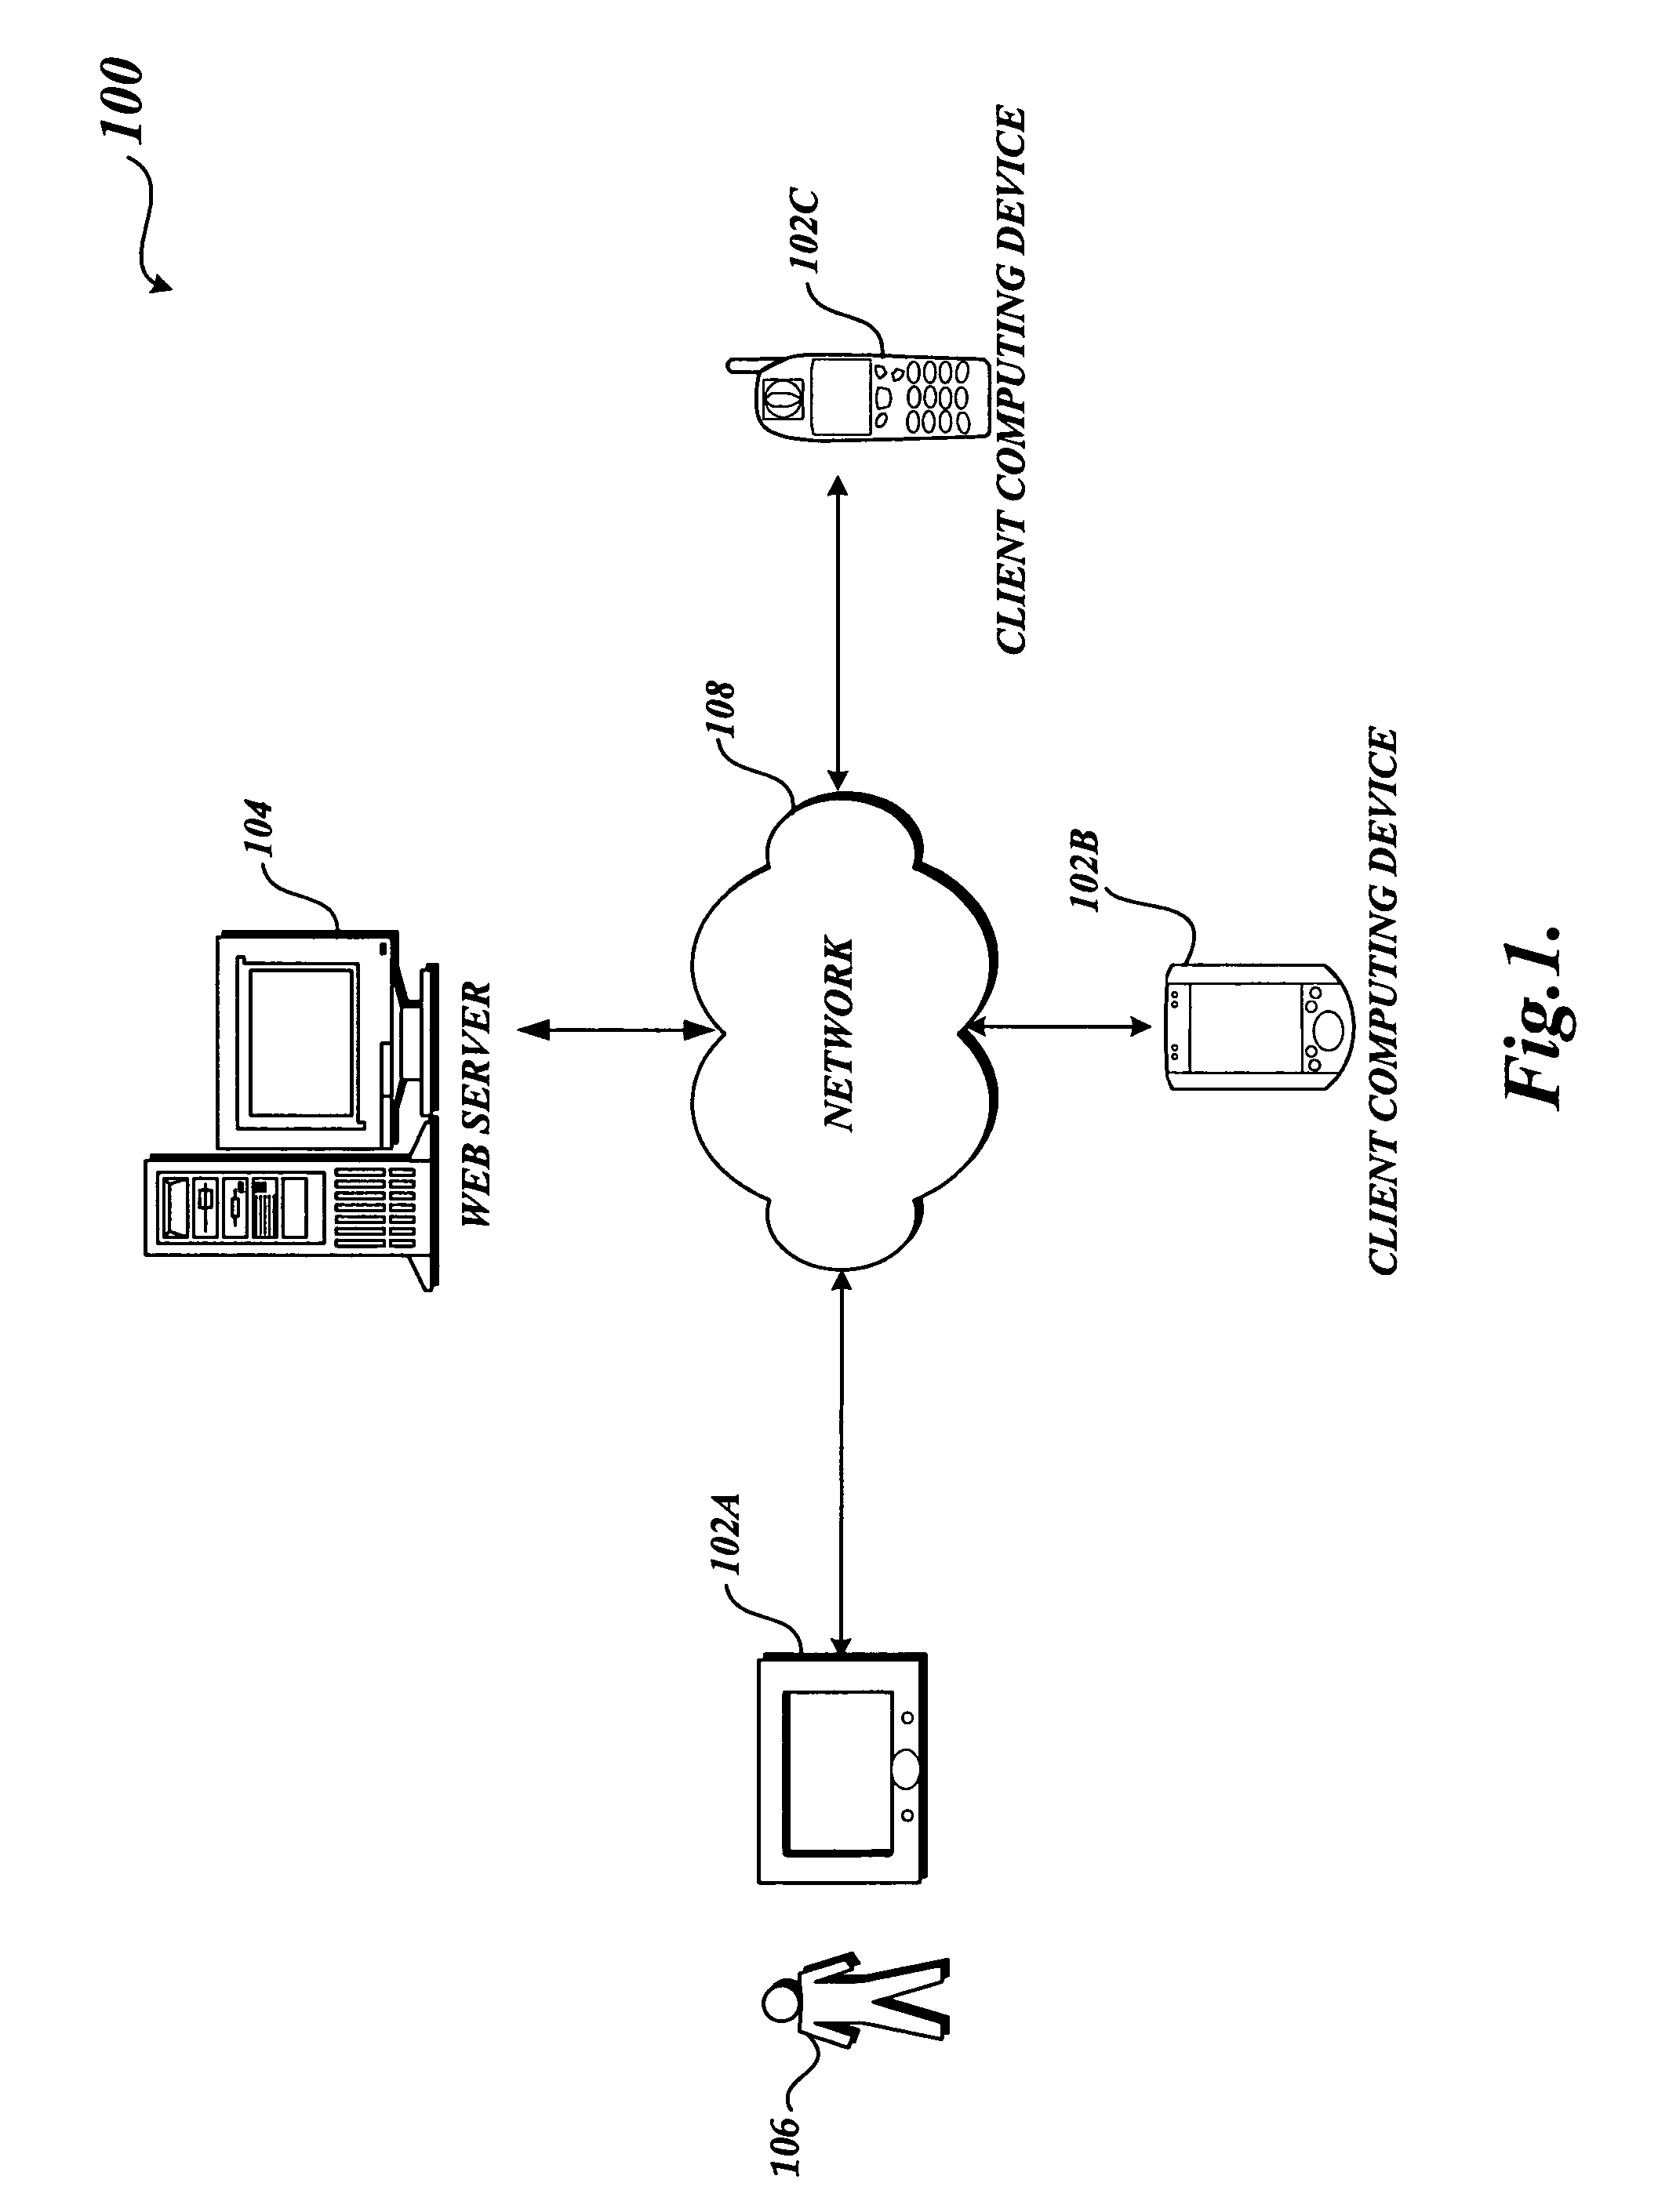 Direction-based system and method of generating commands